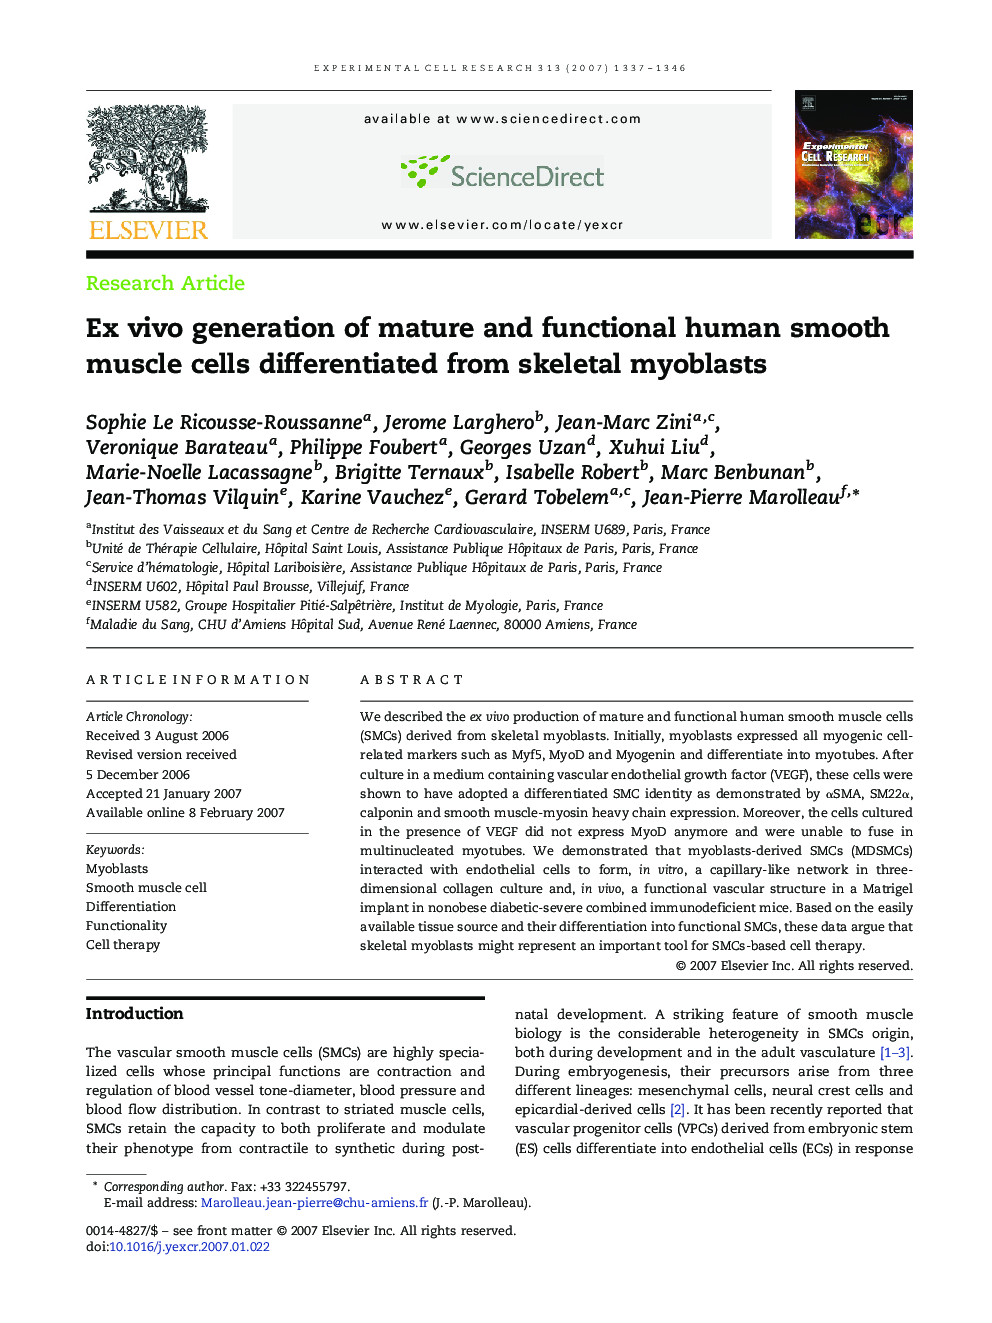 Ex vivo generation of mature and functional human smooth muscle cells differentiated from skeletal myoblasts